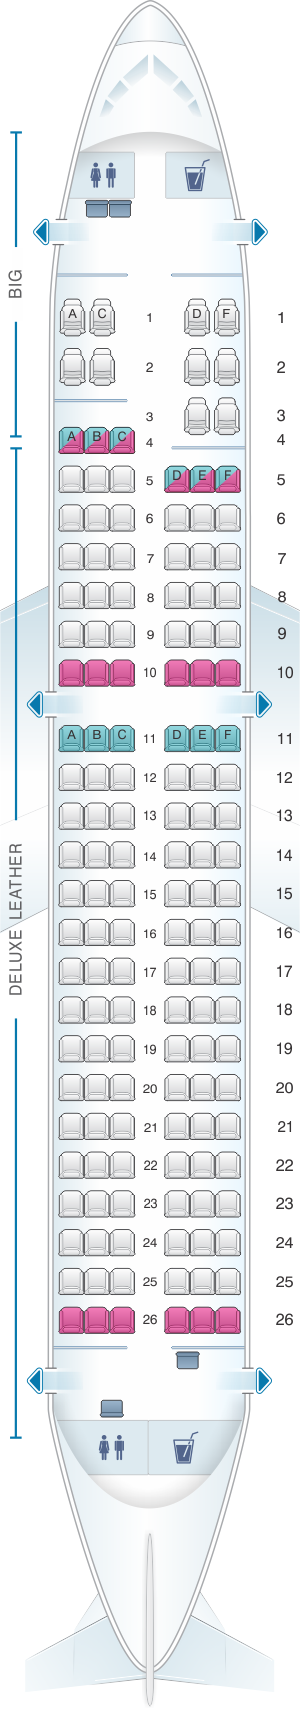 Seat map for Spirit Airlines Airbus A319